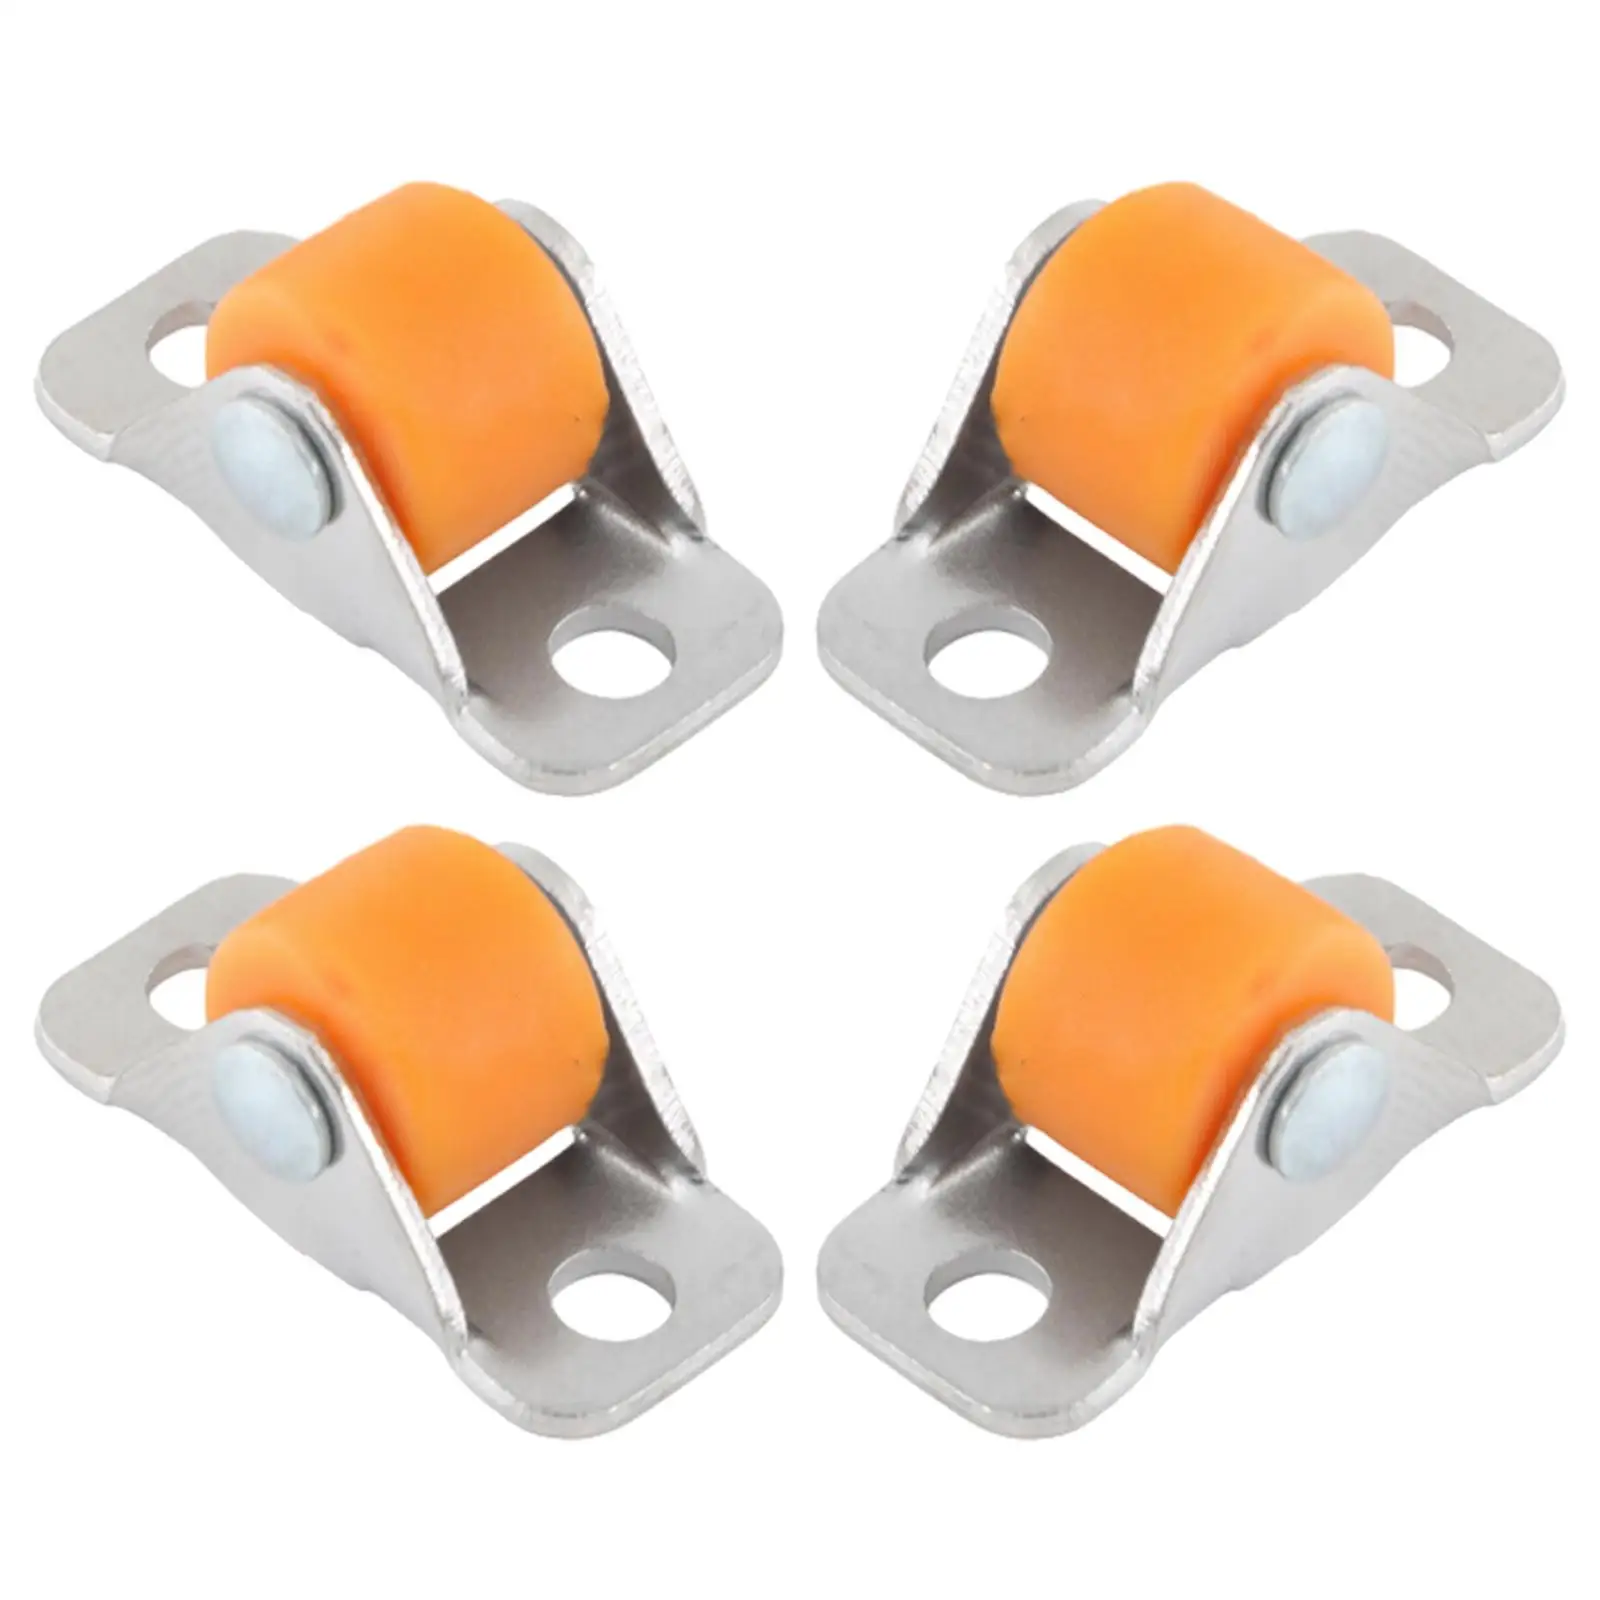 4 Pieces Silent Multipurpose Fixed Castor Wheels Small Rubber Caster Set for Shelves Table Shopping Carts Workbench Cupboard